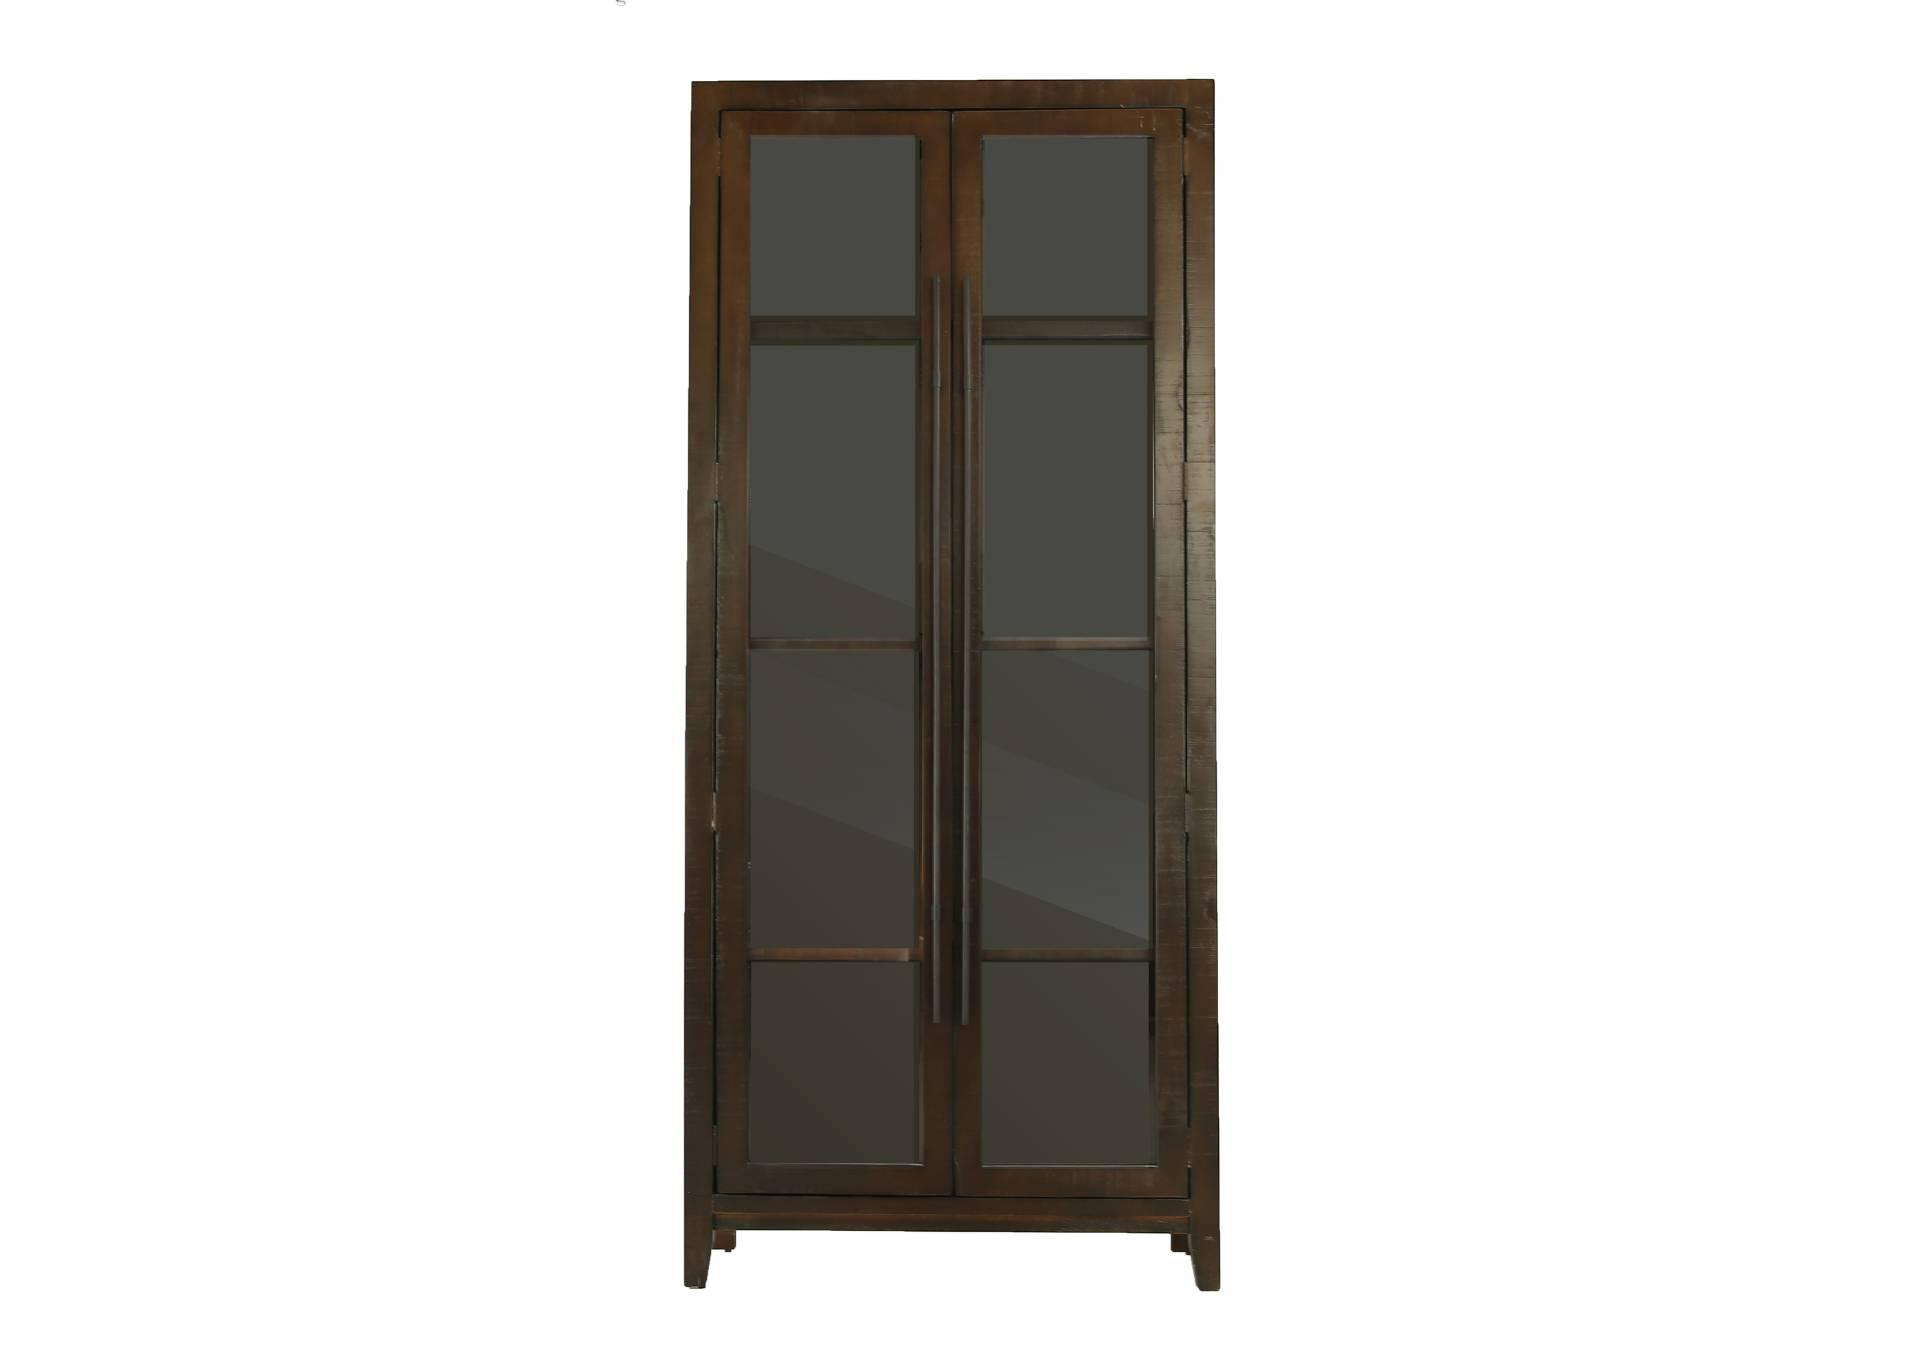 ANDERSON GREY ARMOIRE,FURNITURE SOURCE INTERNATIONAL